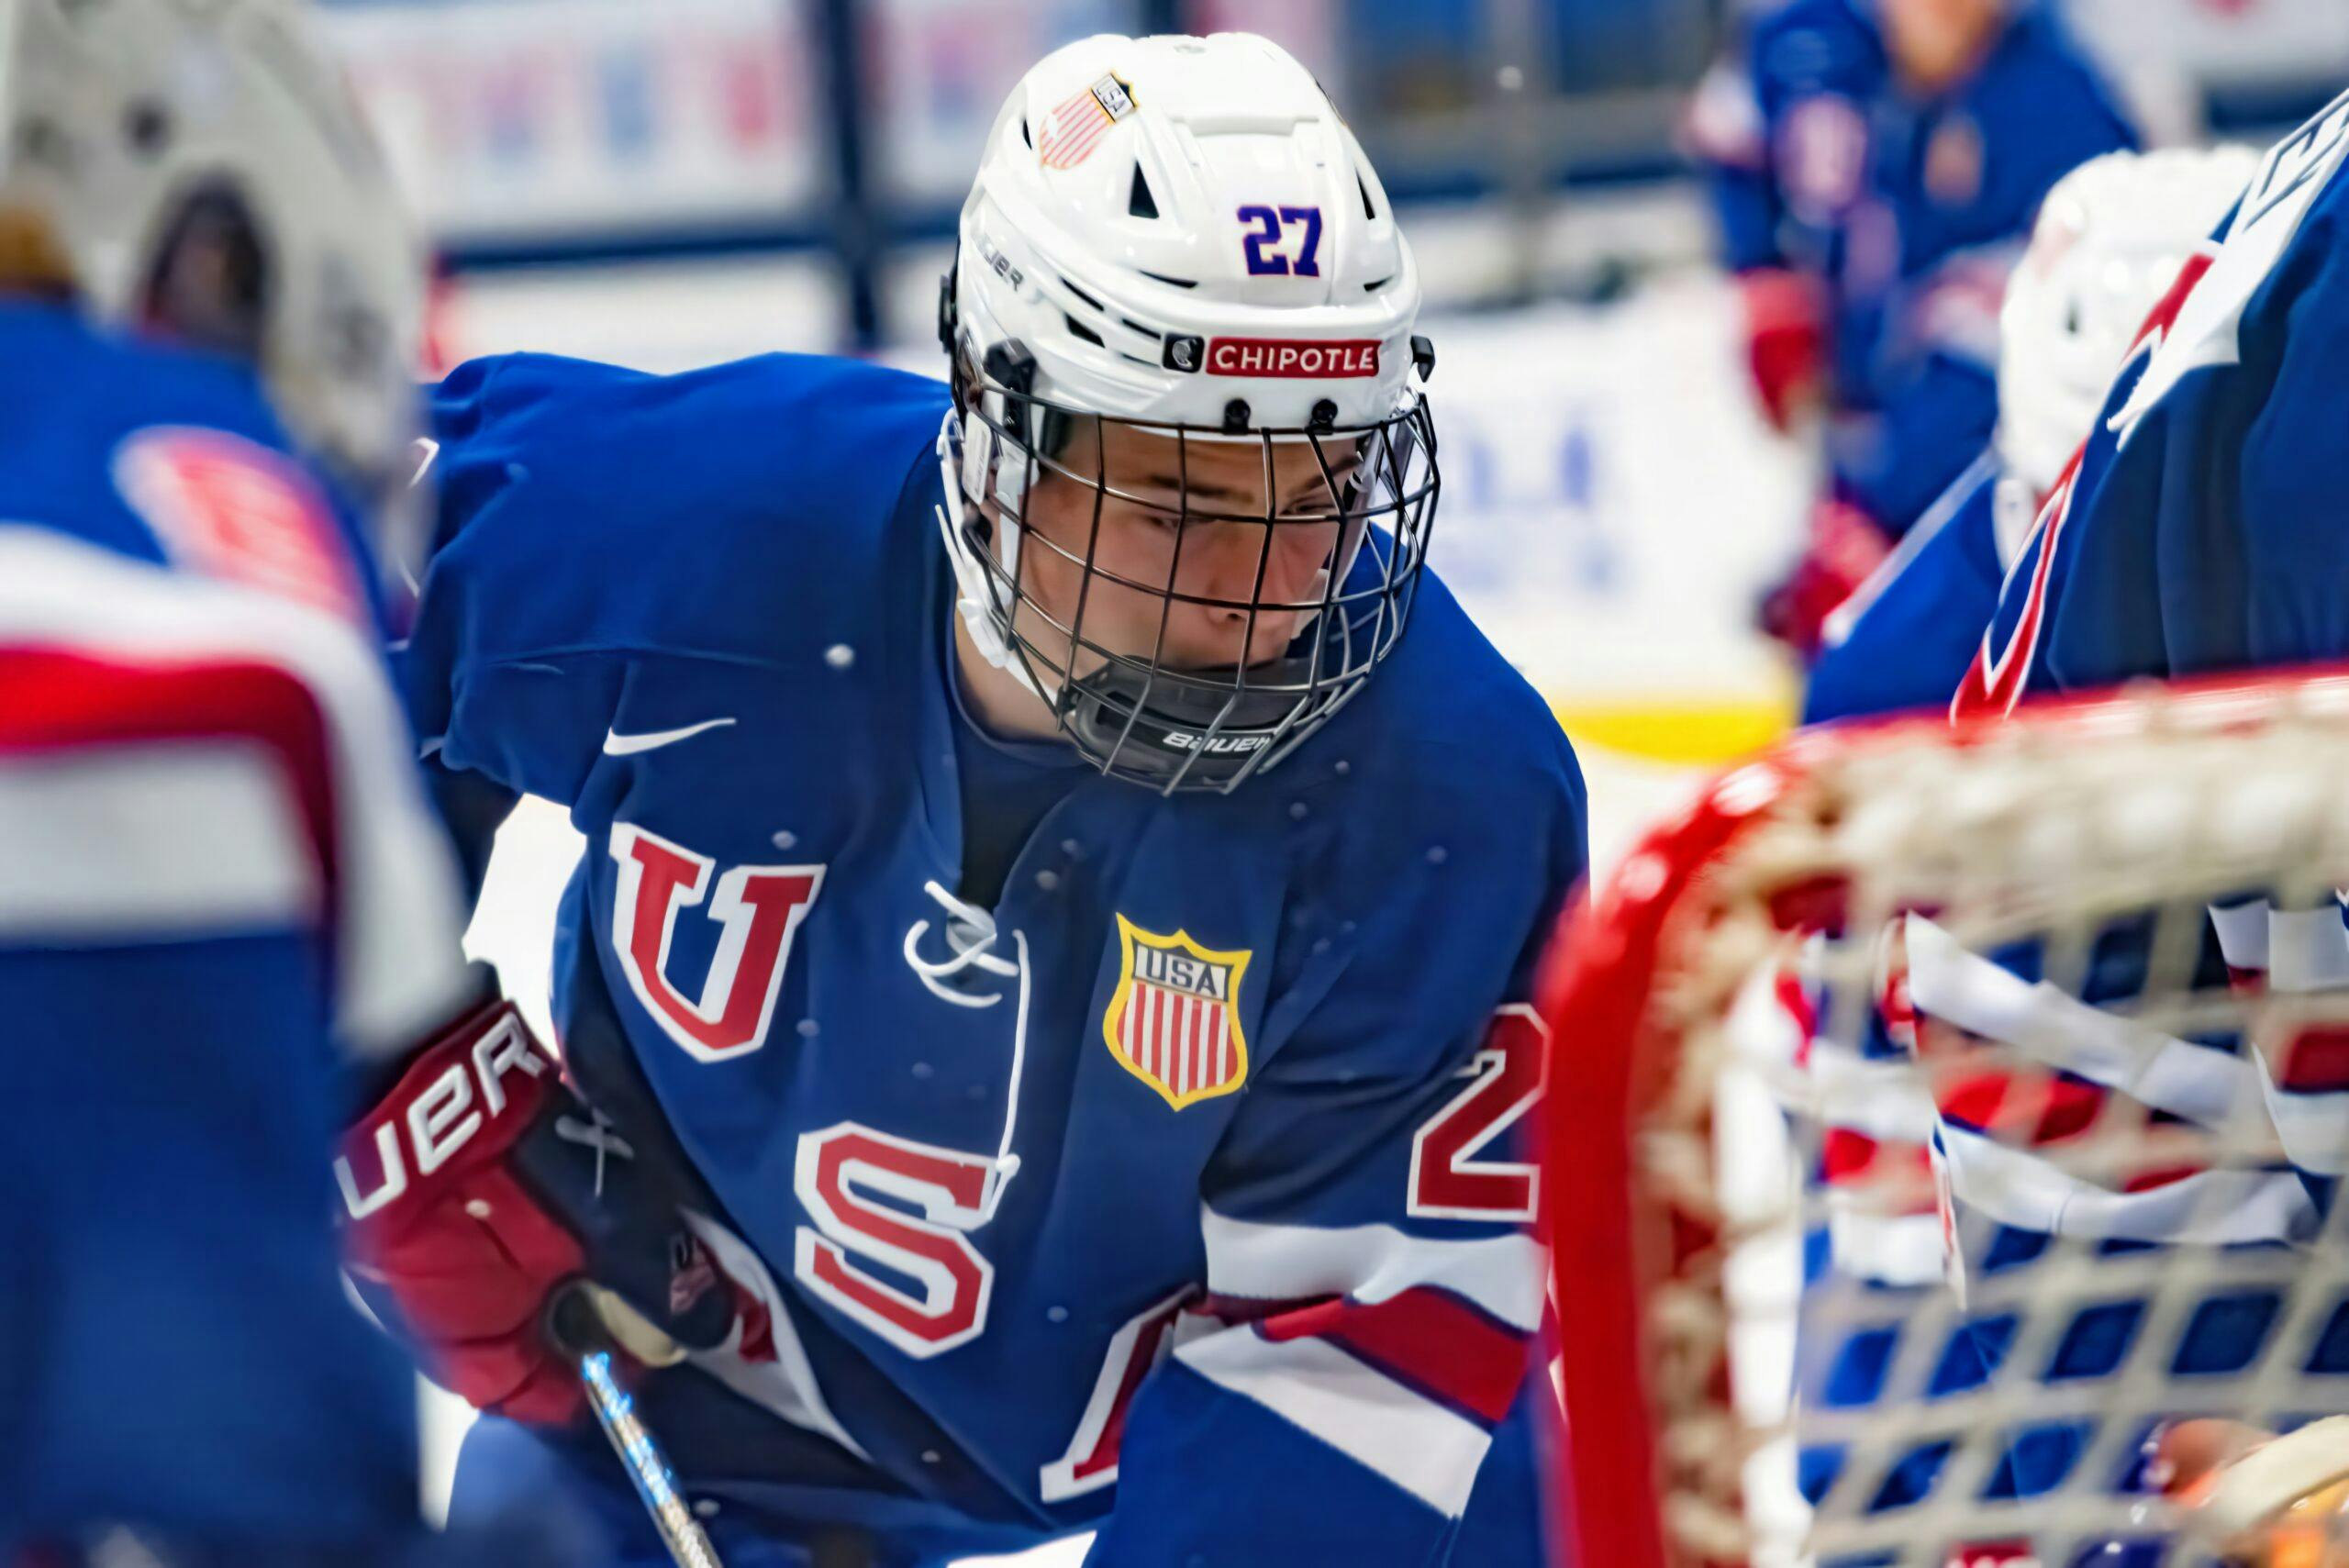 Meet James Hagens, the 2025 NHL Draft prospect drawing comparisons to Jack Hughes